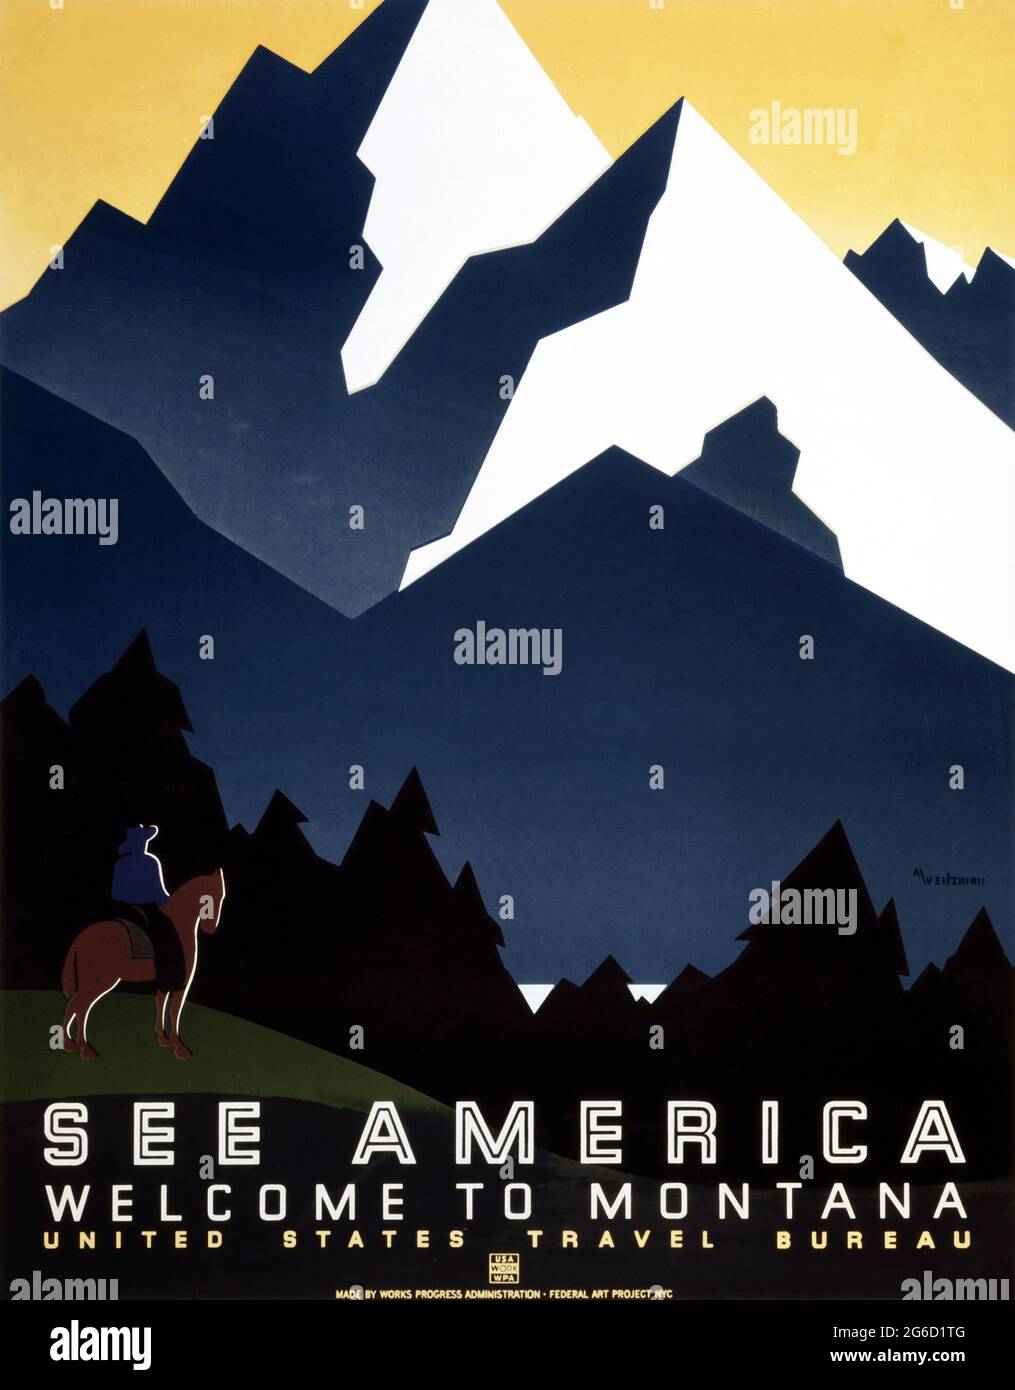 SEE AMERICA, vintage travel poster. Welcome to Montana, WPA poster, ca. 1937. United States Travel Bureau. Stock Photo